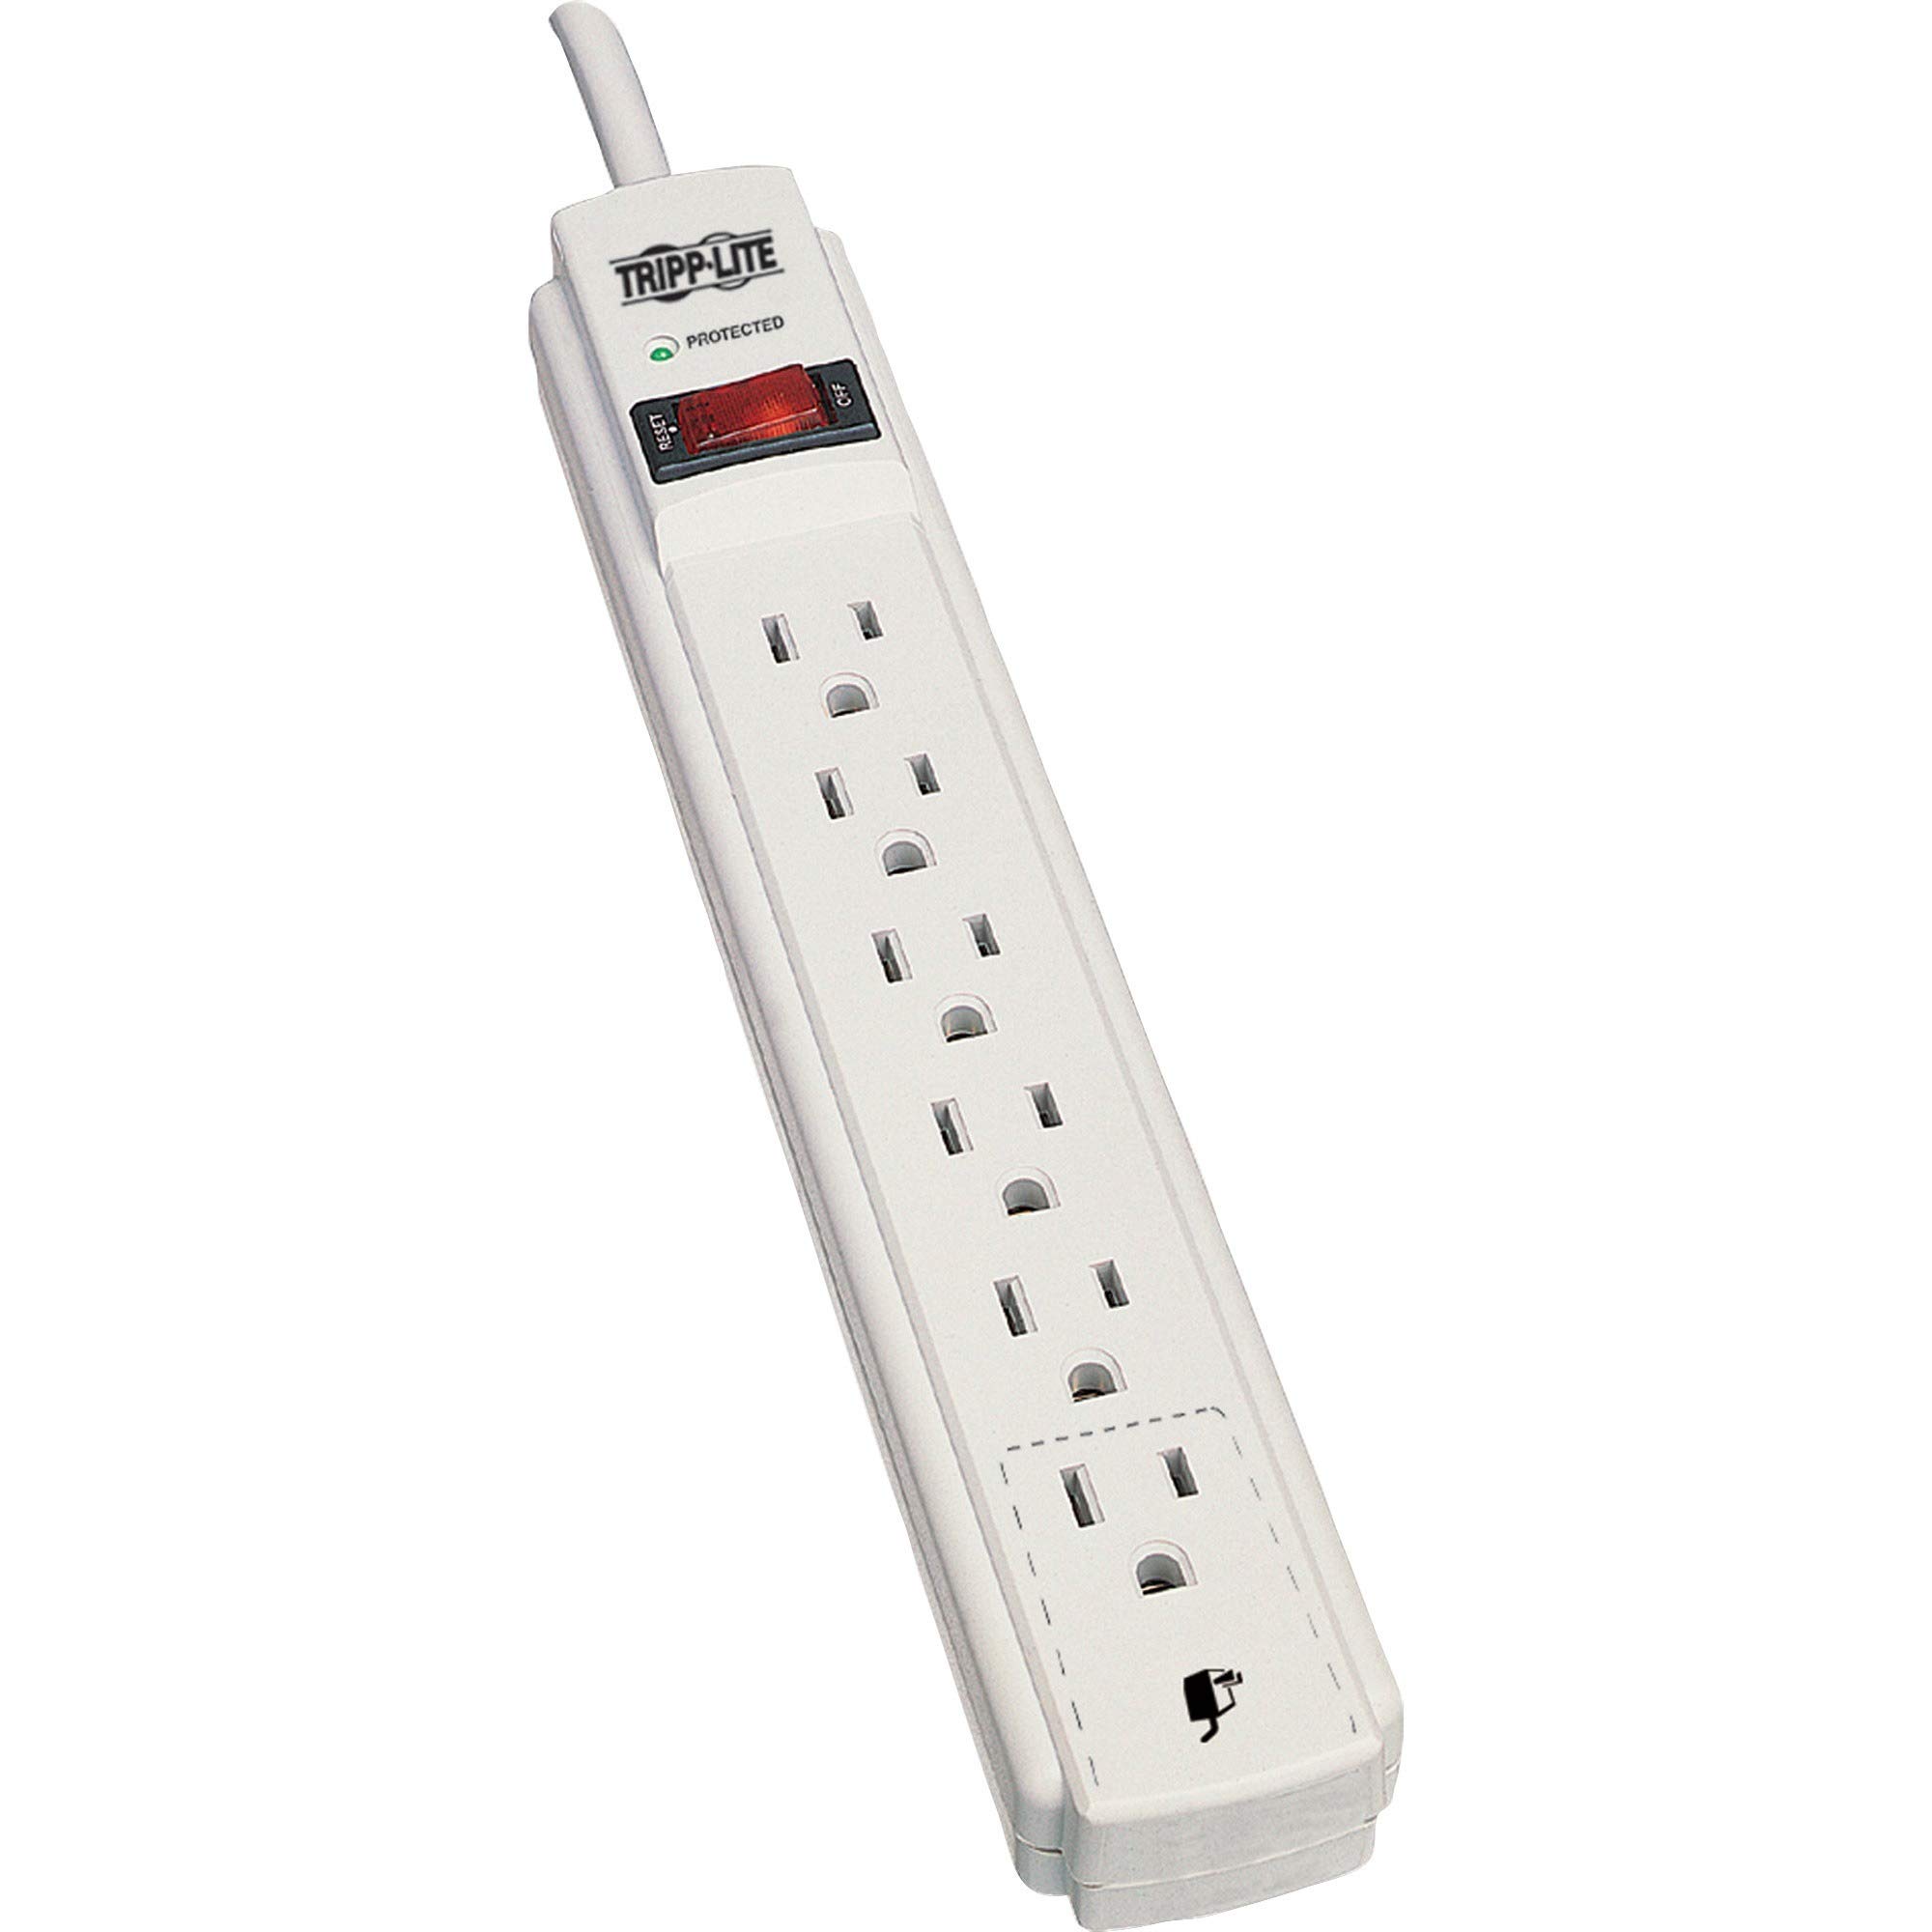 Tripp Lite 6 Outlet Surge Protector Power Strip, Extra Long Cord 15ft, & $20,000 INSURANCE (TLP615) Gray